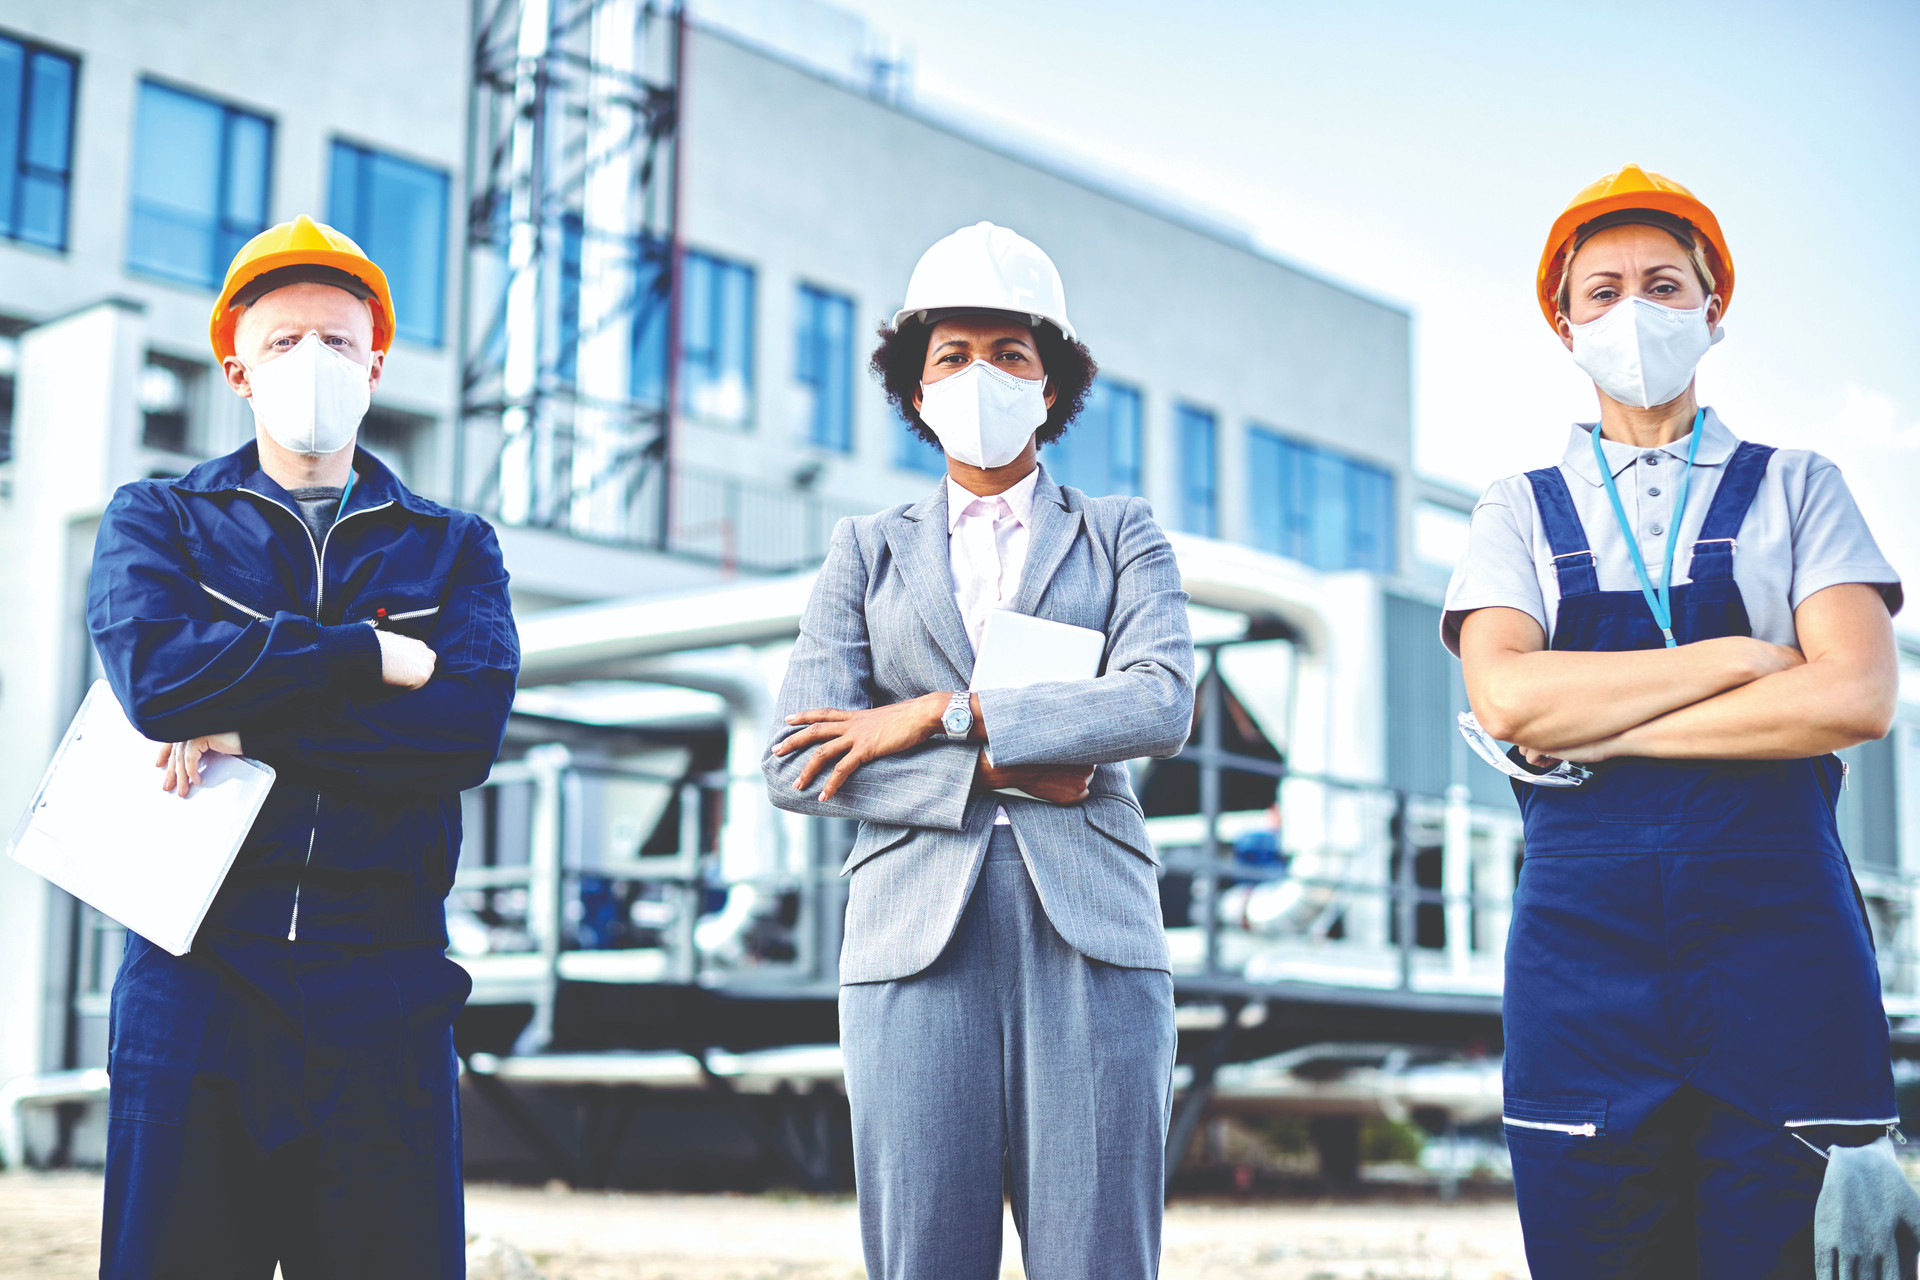 team-confident-civil-engineers-with-protective-face-masks-construction-site-compressed.jpg